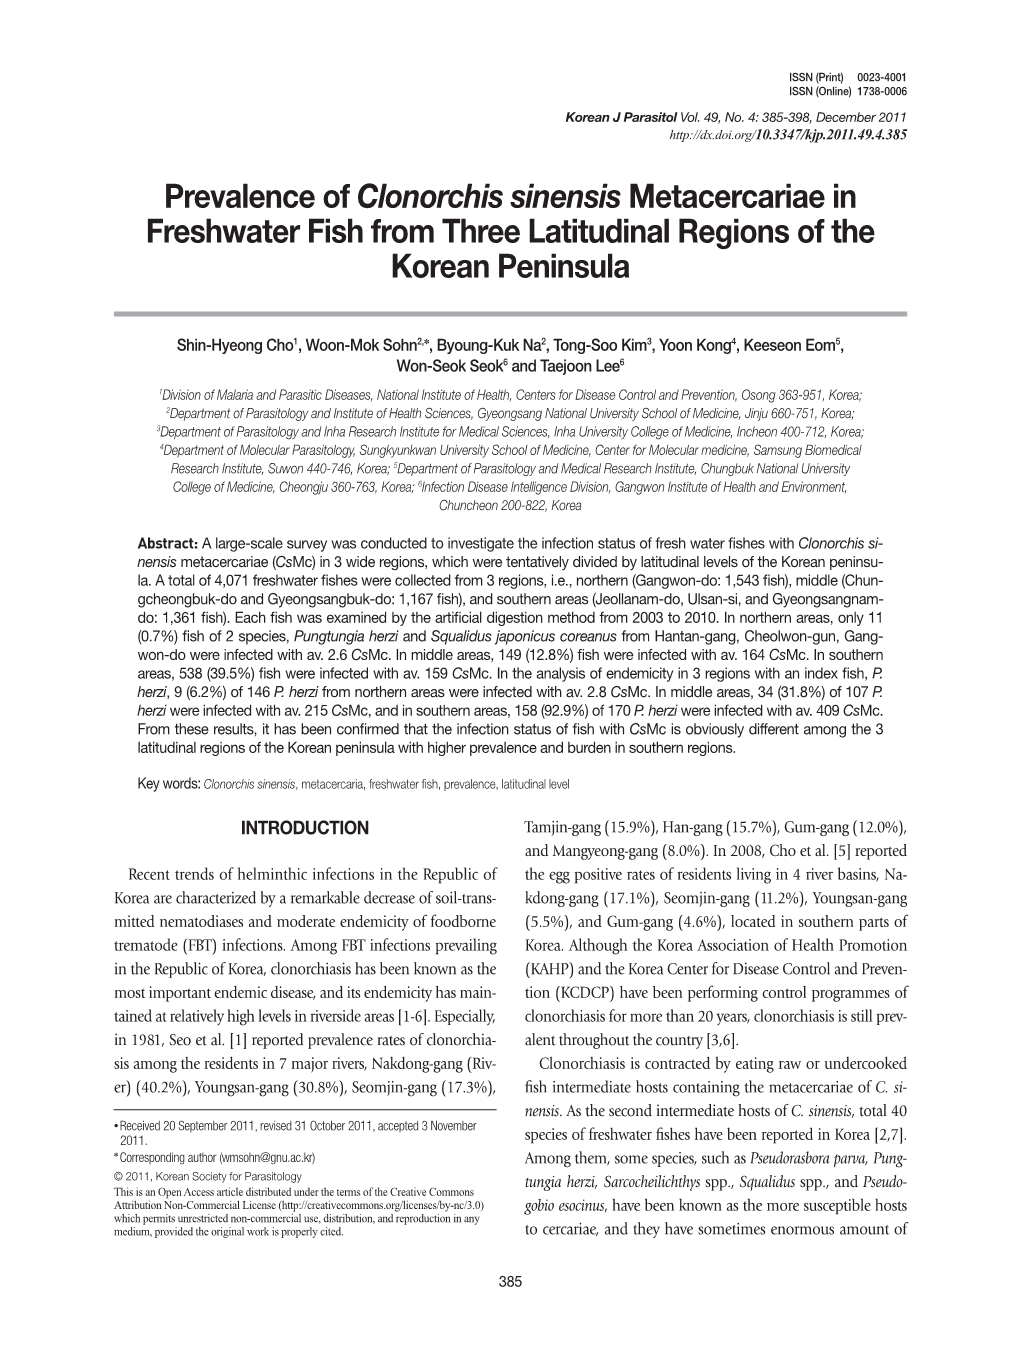 Prevalence of Clonorchis Sinensis Metacercariae in Freshwater Fish from Three Latitudinal Regions of the Korean Peninsula